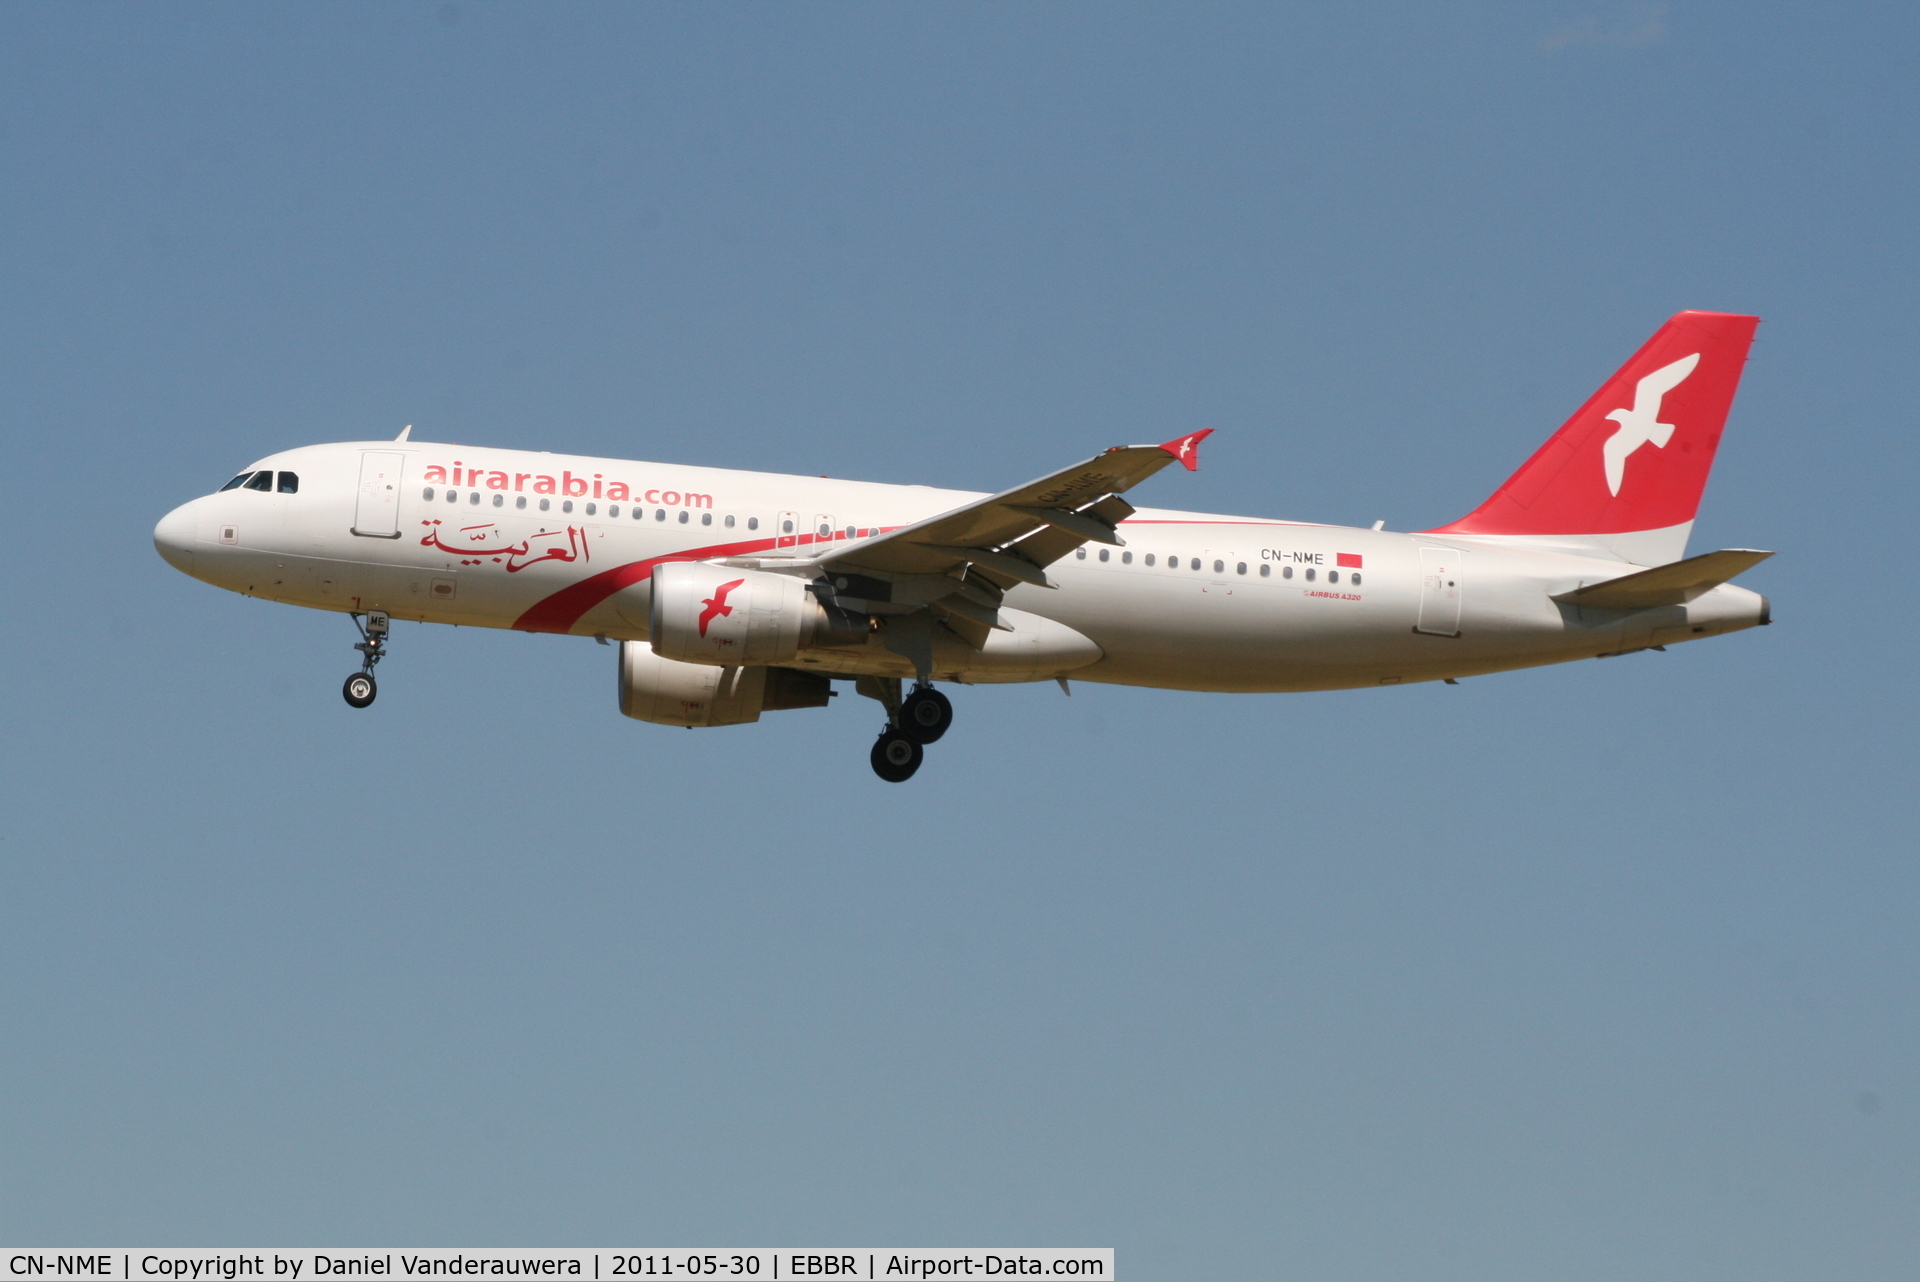 CN-NME, 2004 Airbus A320-214 C/N 2166, Arrival of flight 3O 2113